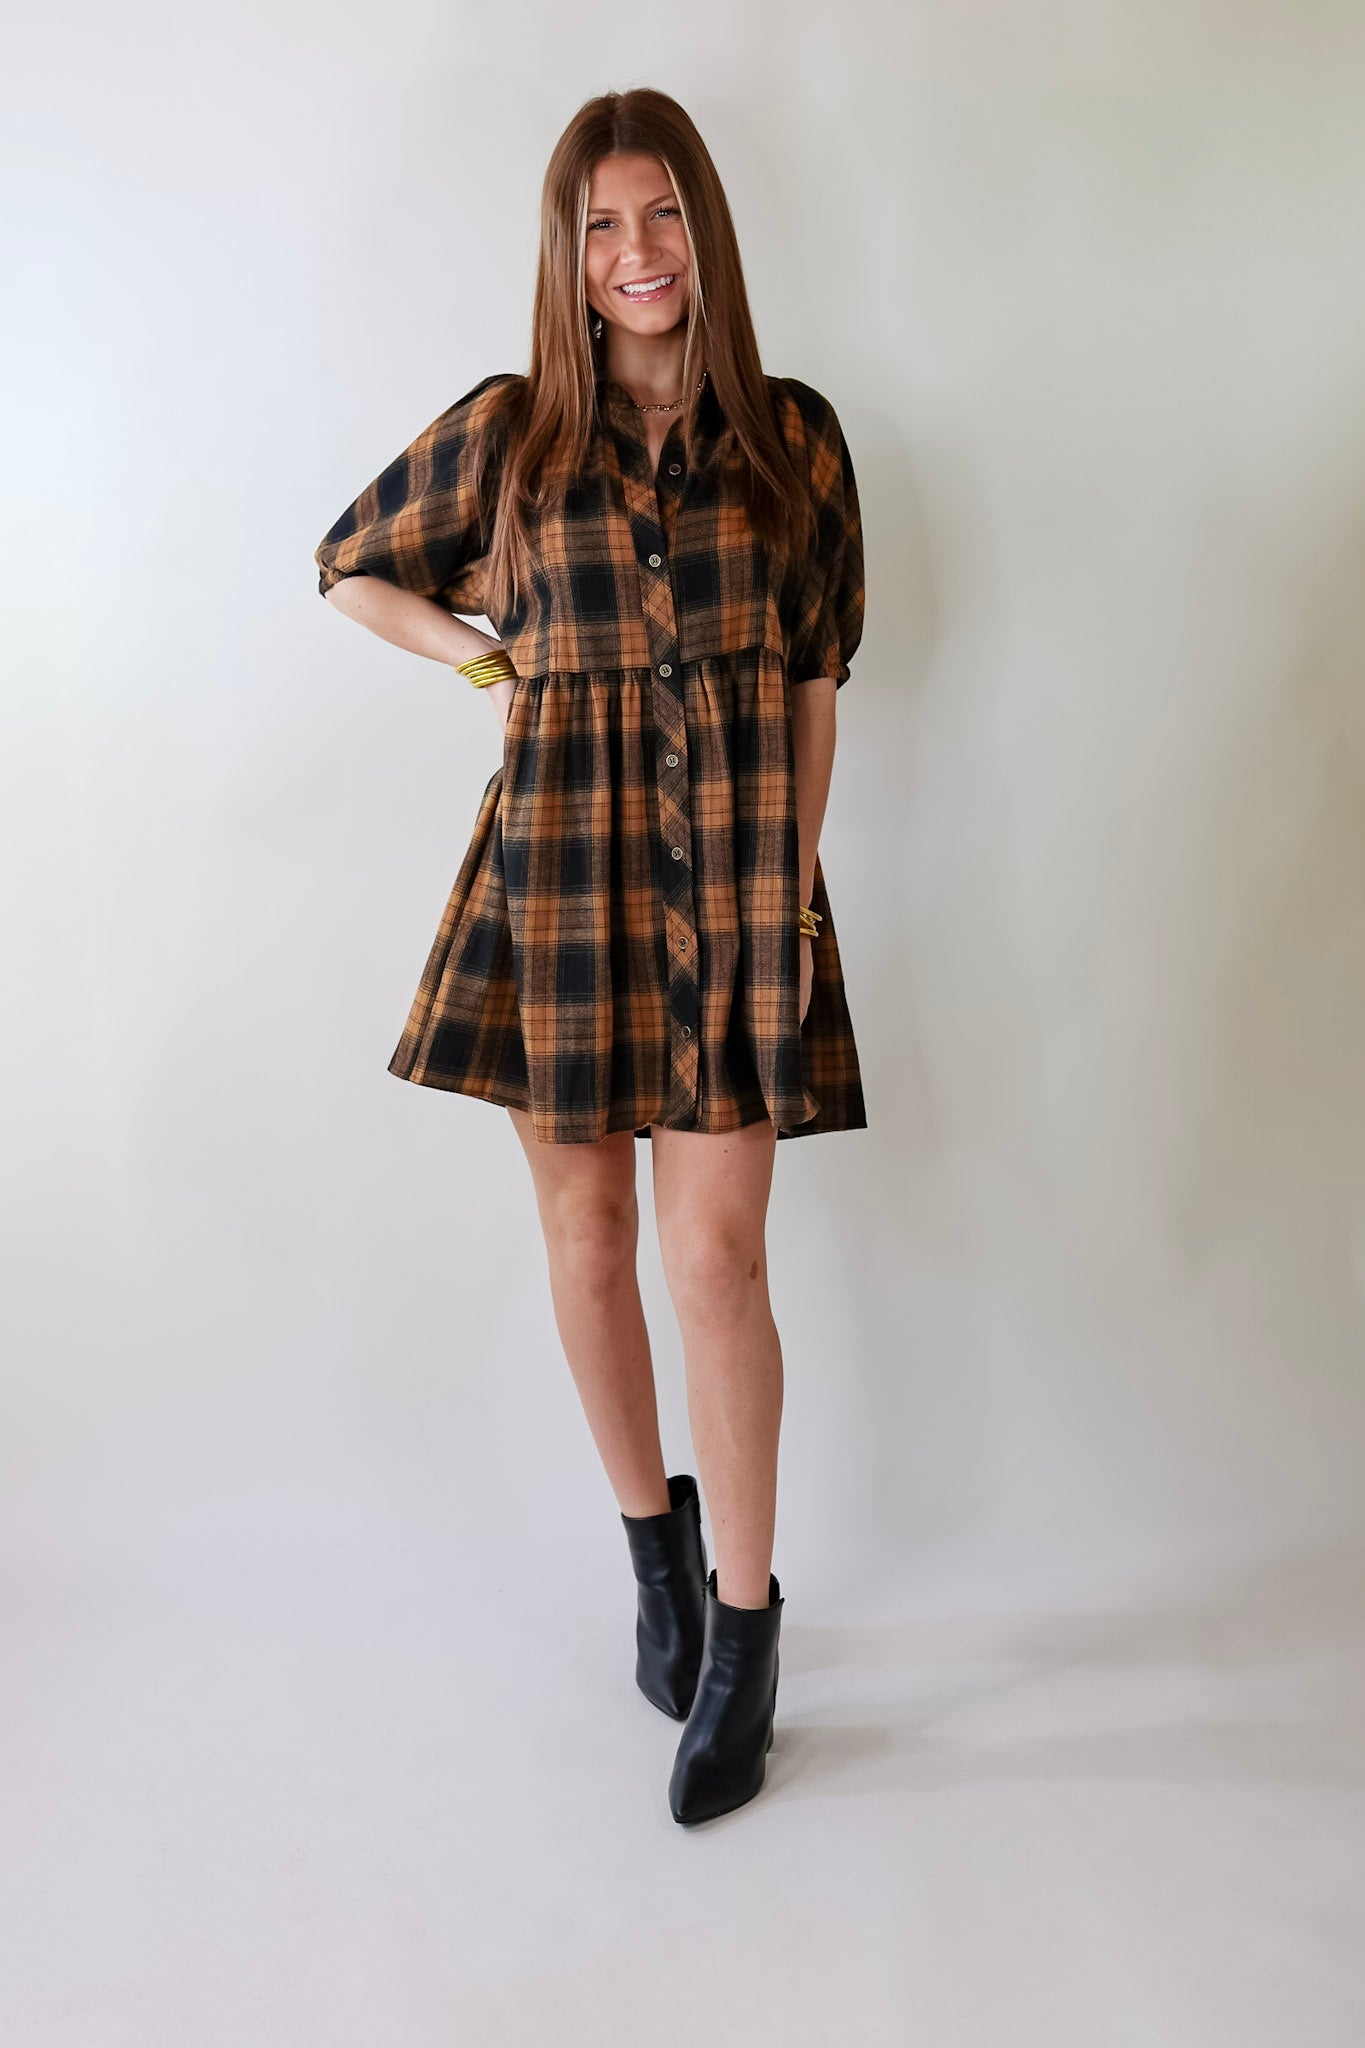 Adventures Ahead Plaid Button Up Babydoll Dress in Camel Brown - Giddy Up Glamour Boutique